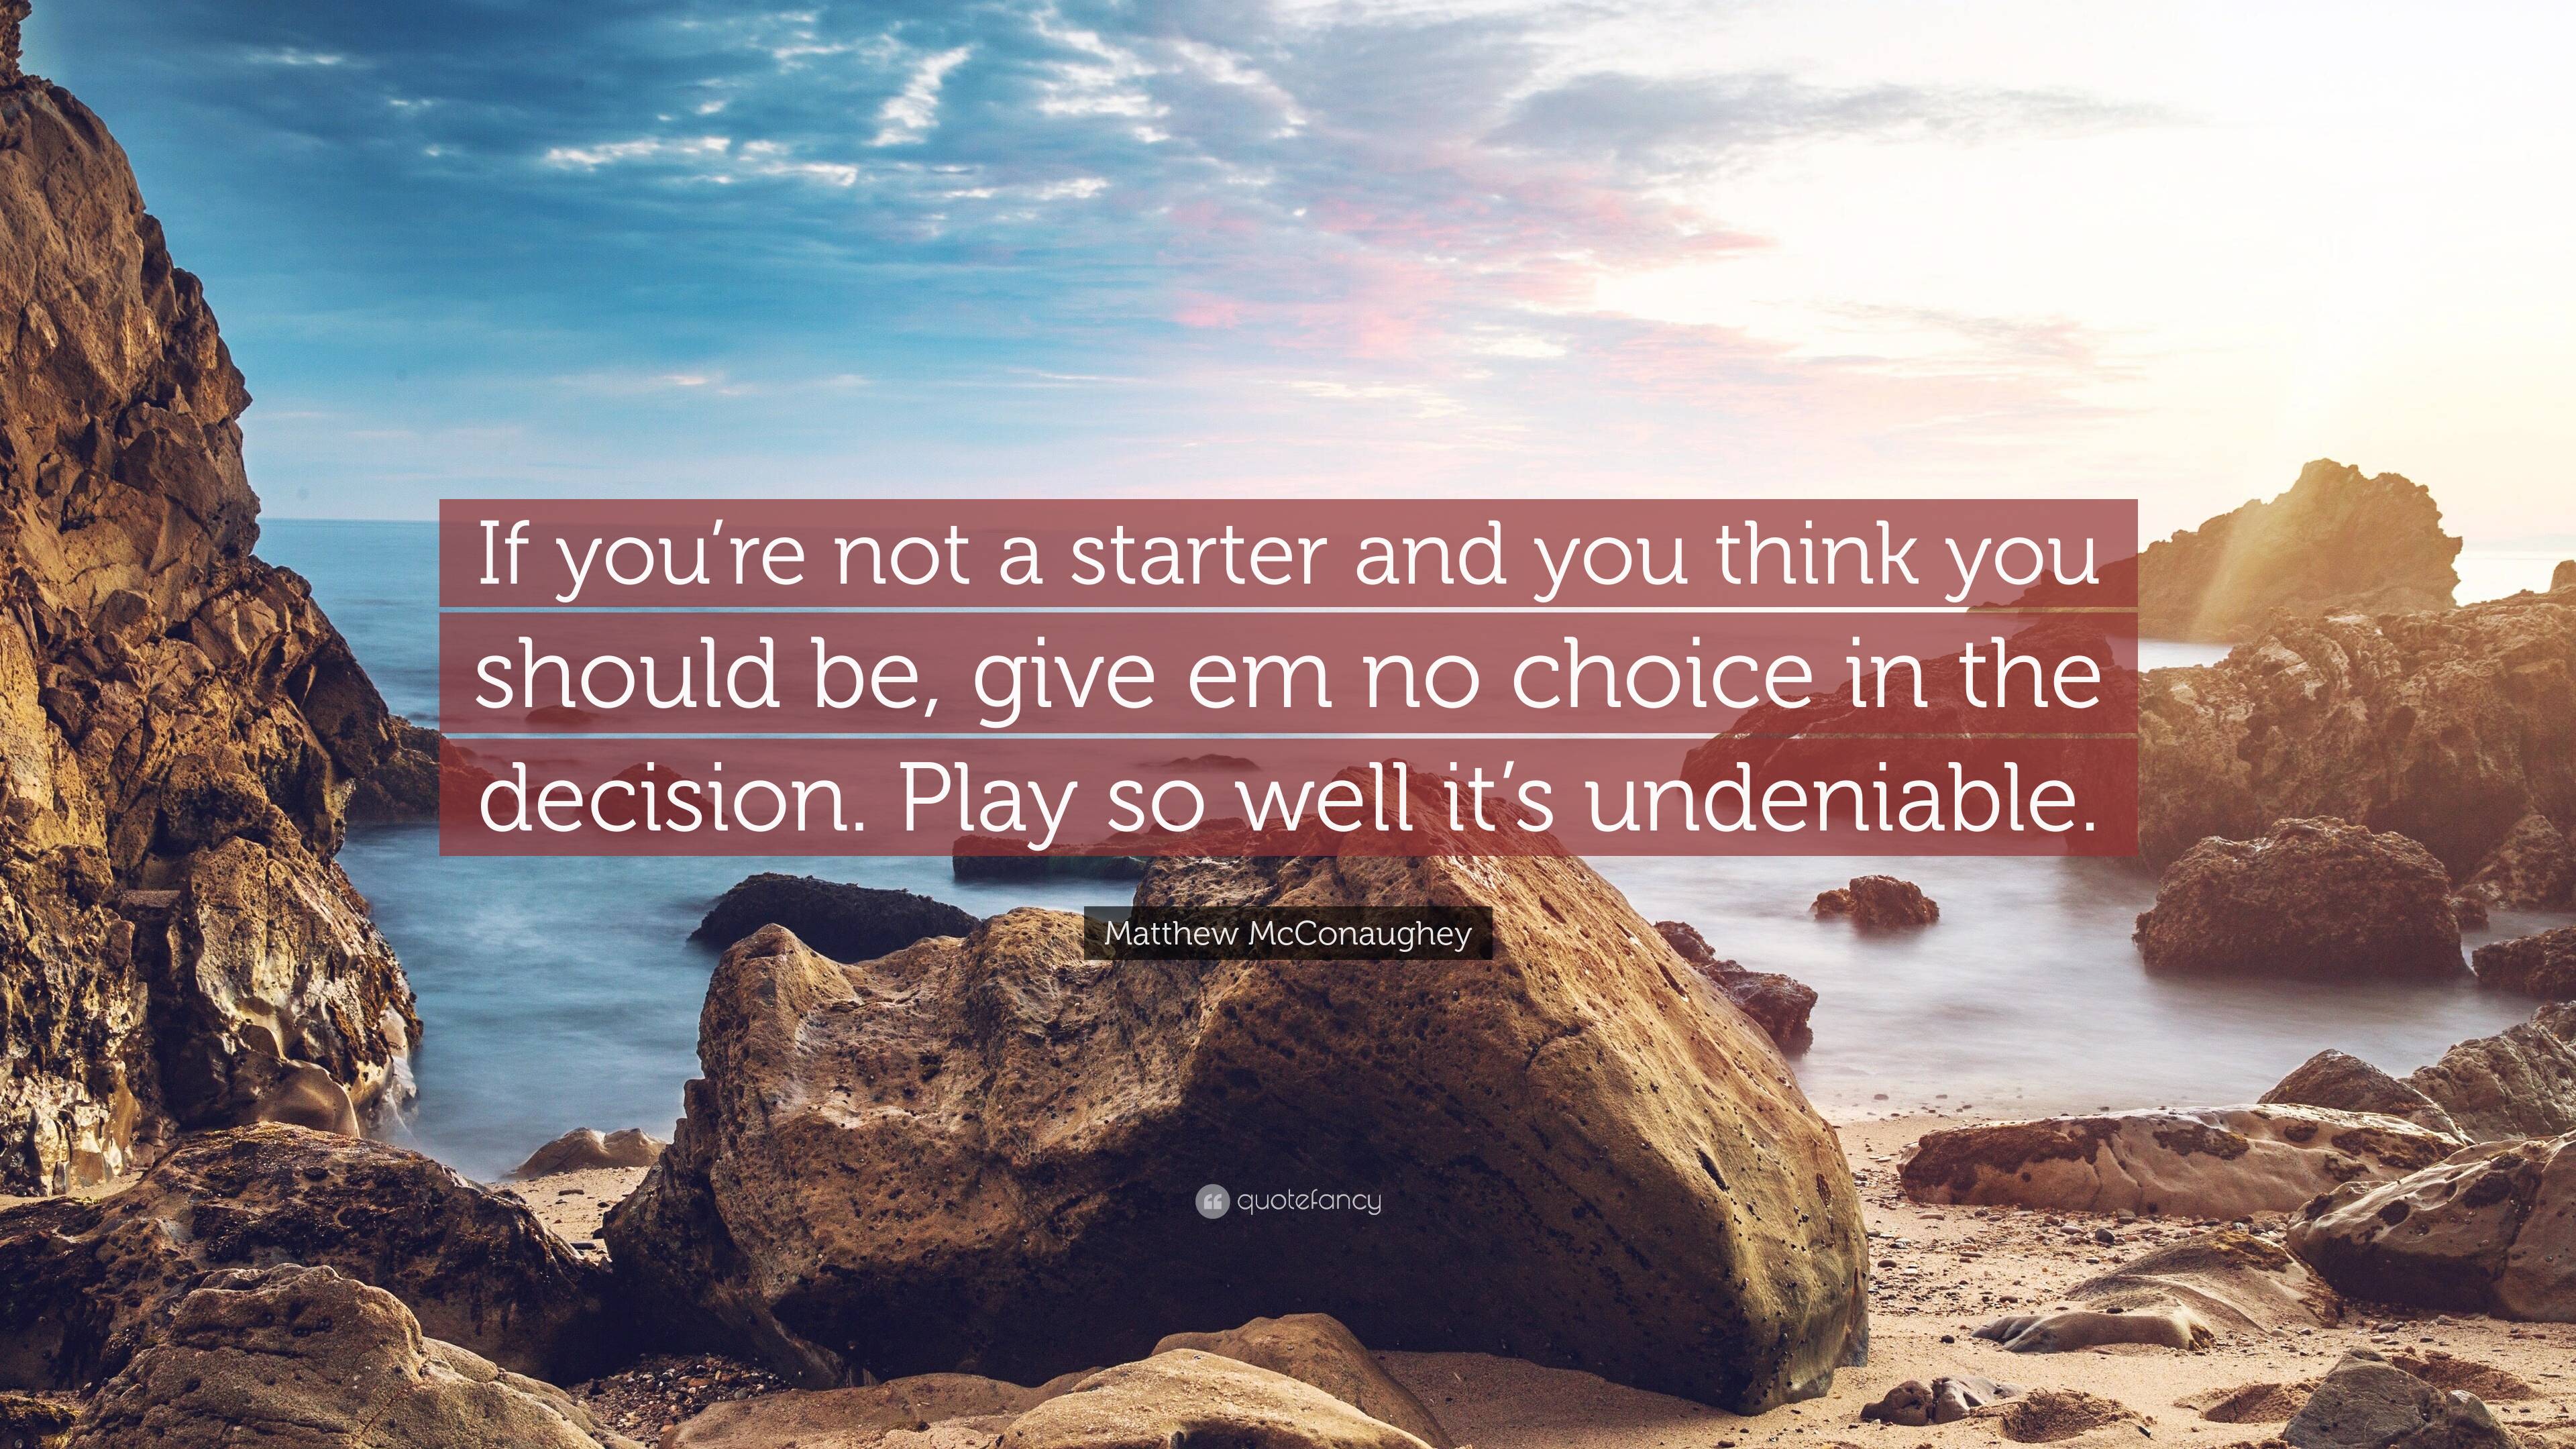 Matthew McConaughey Quote: “If you’re not a starter and you think you ...